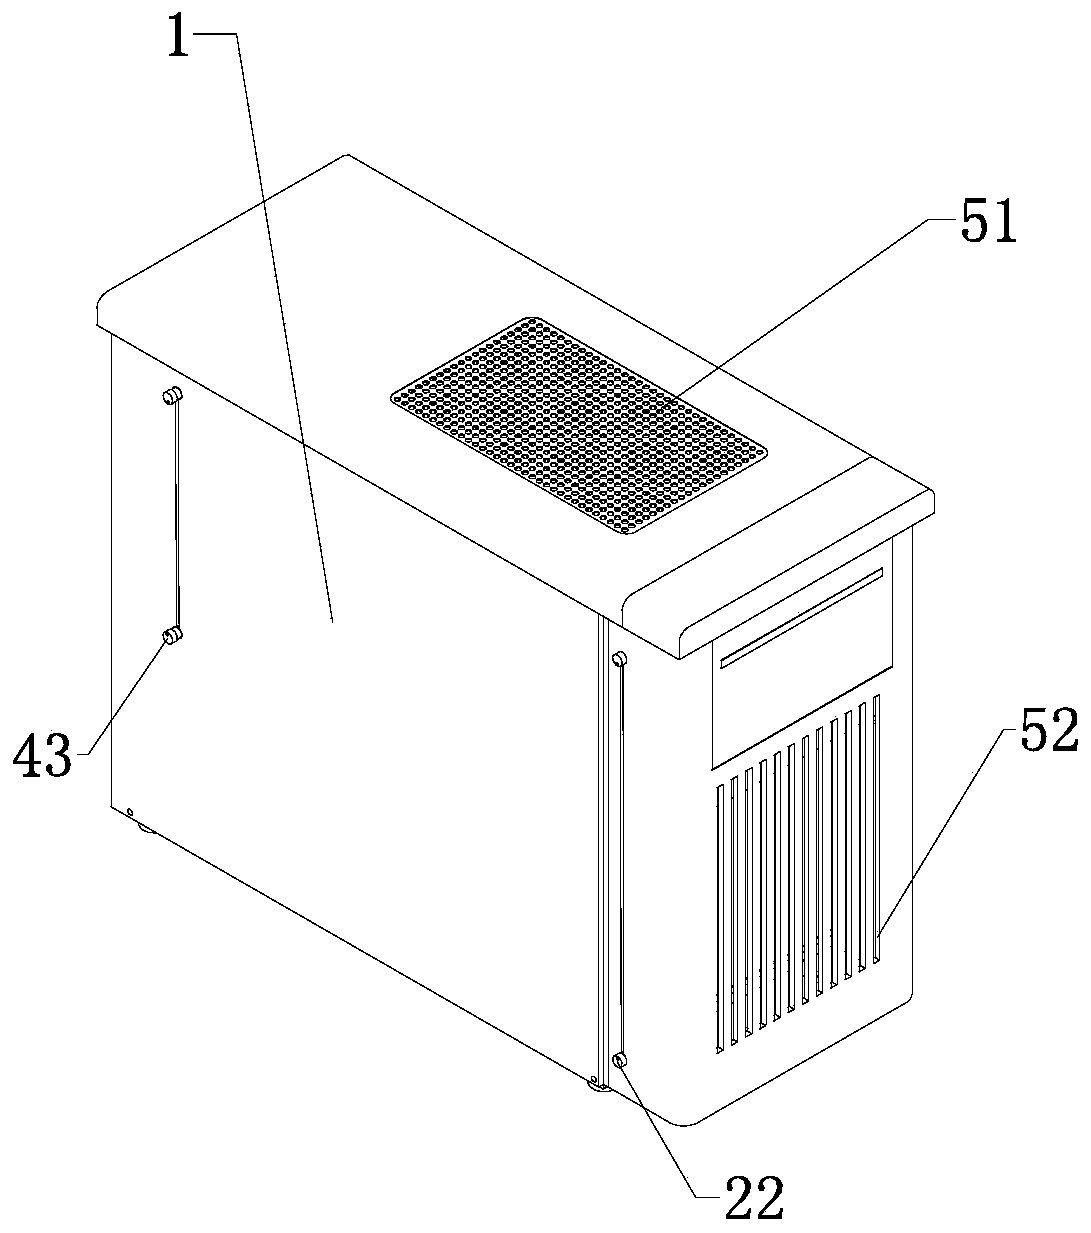 Auxiliary heat dissipation and dust removal device for computer case